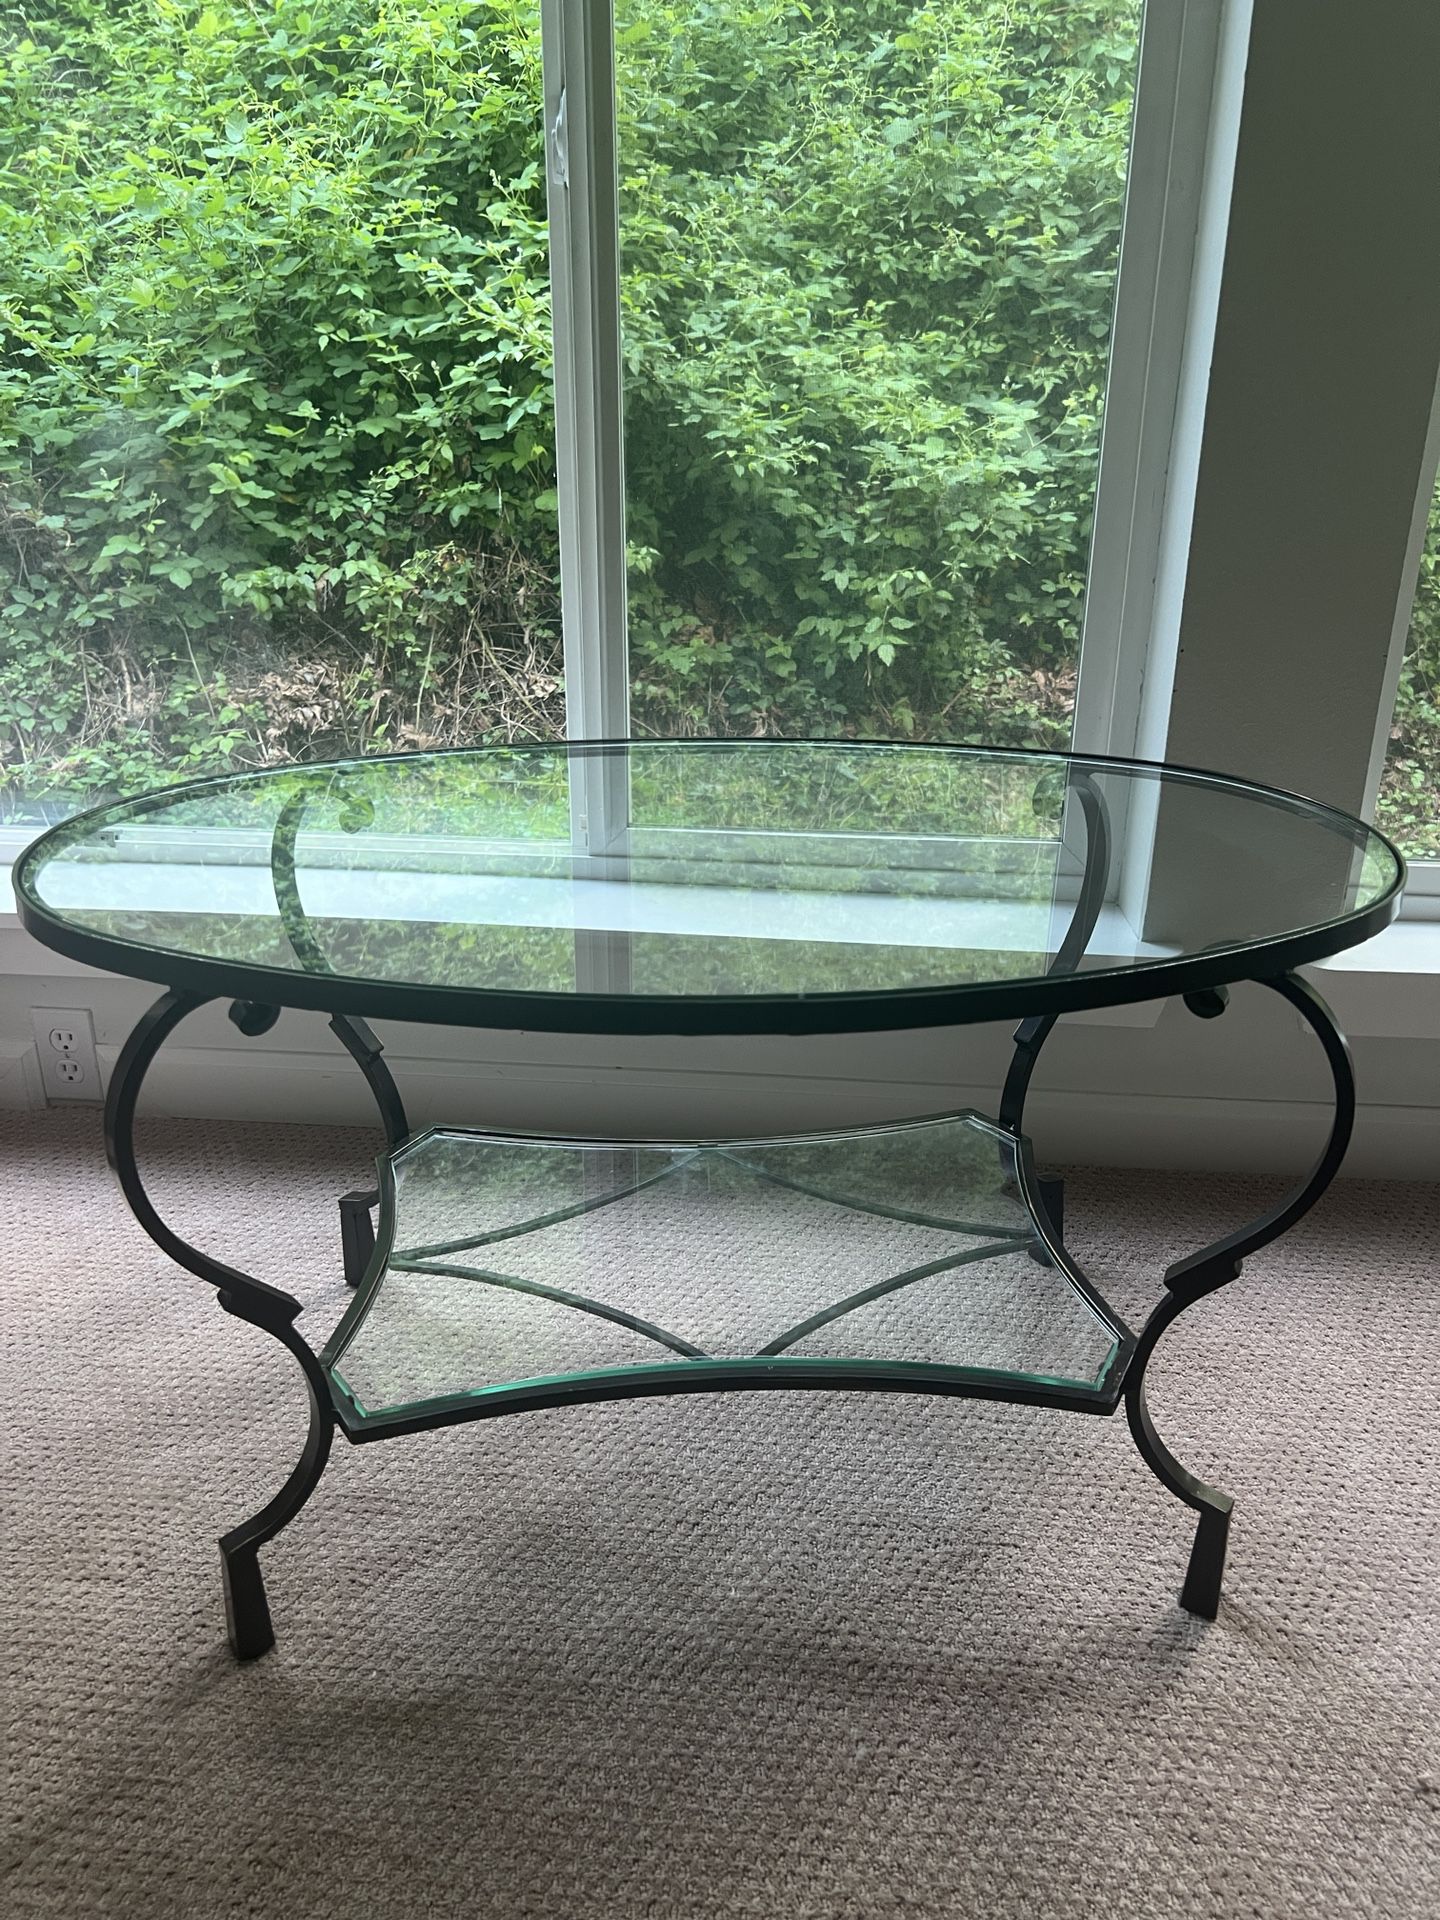 Pier 1 Chasca Oval Coffee Table